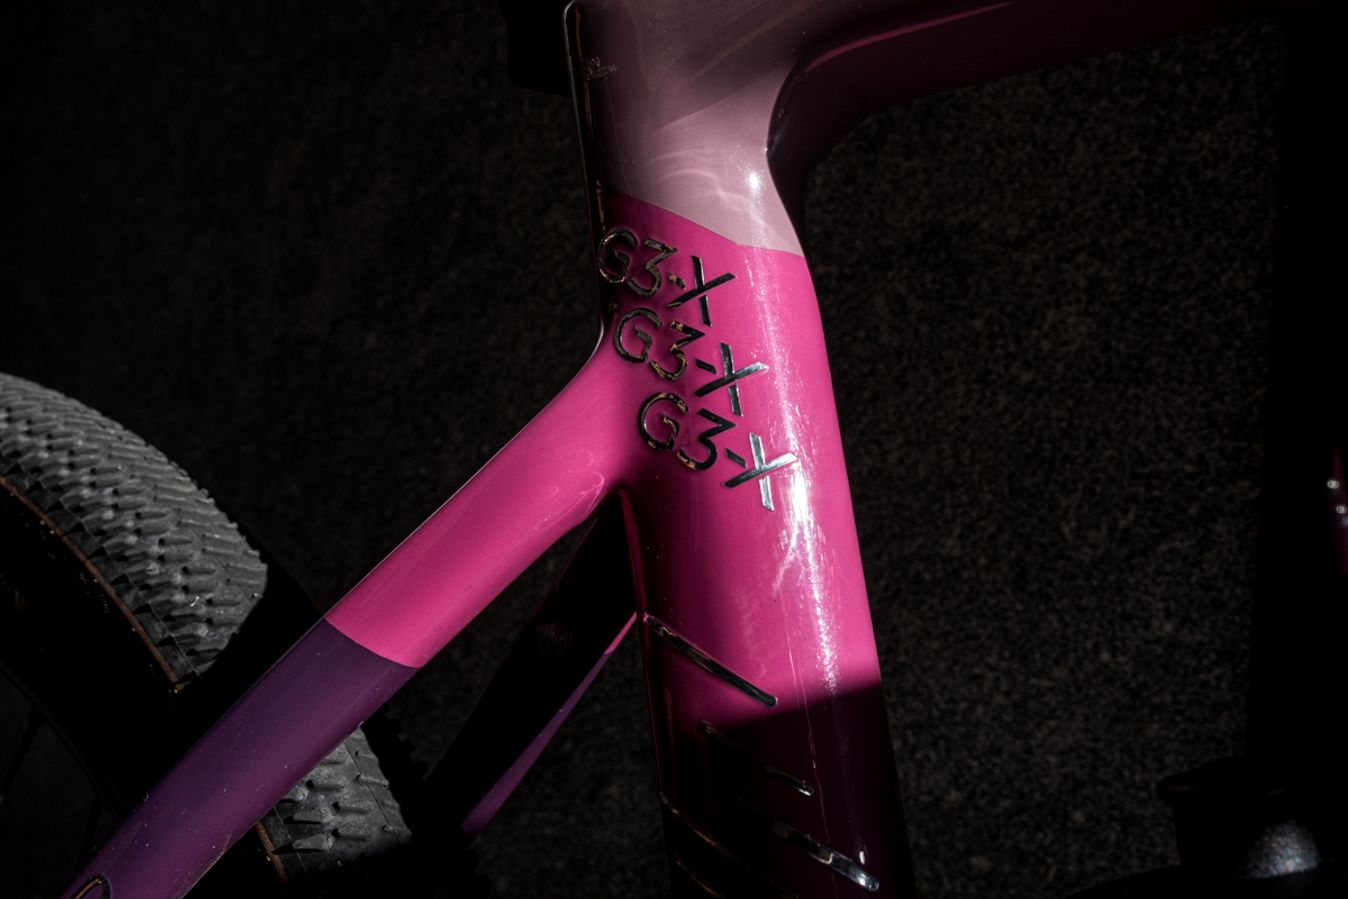 Colnago's G3-X was released in 2019